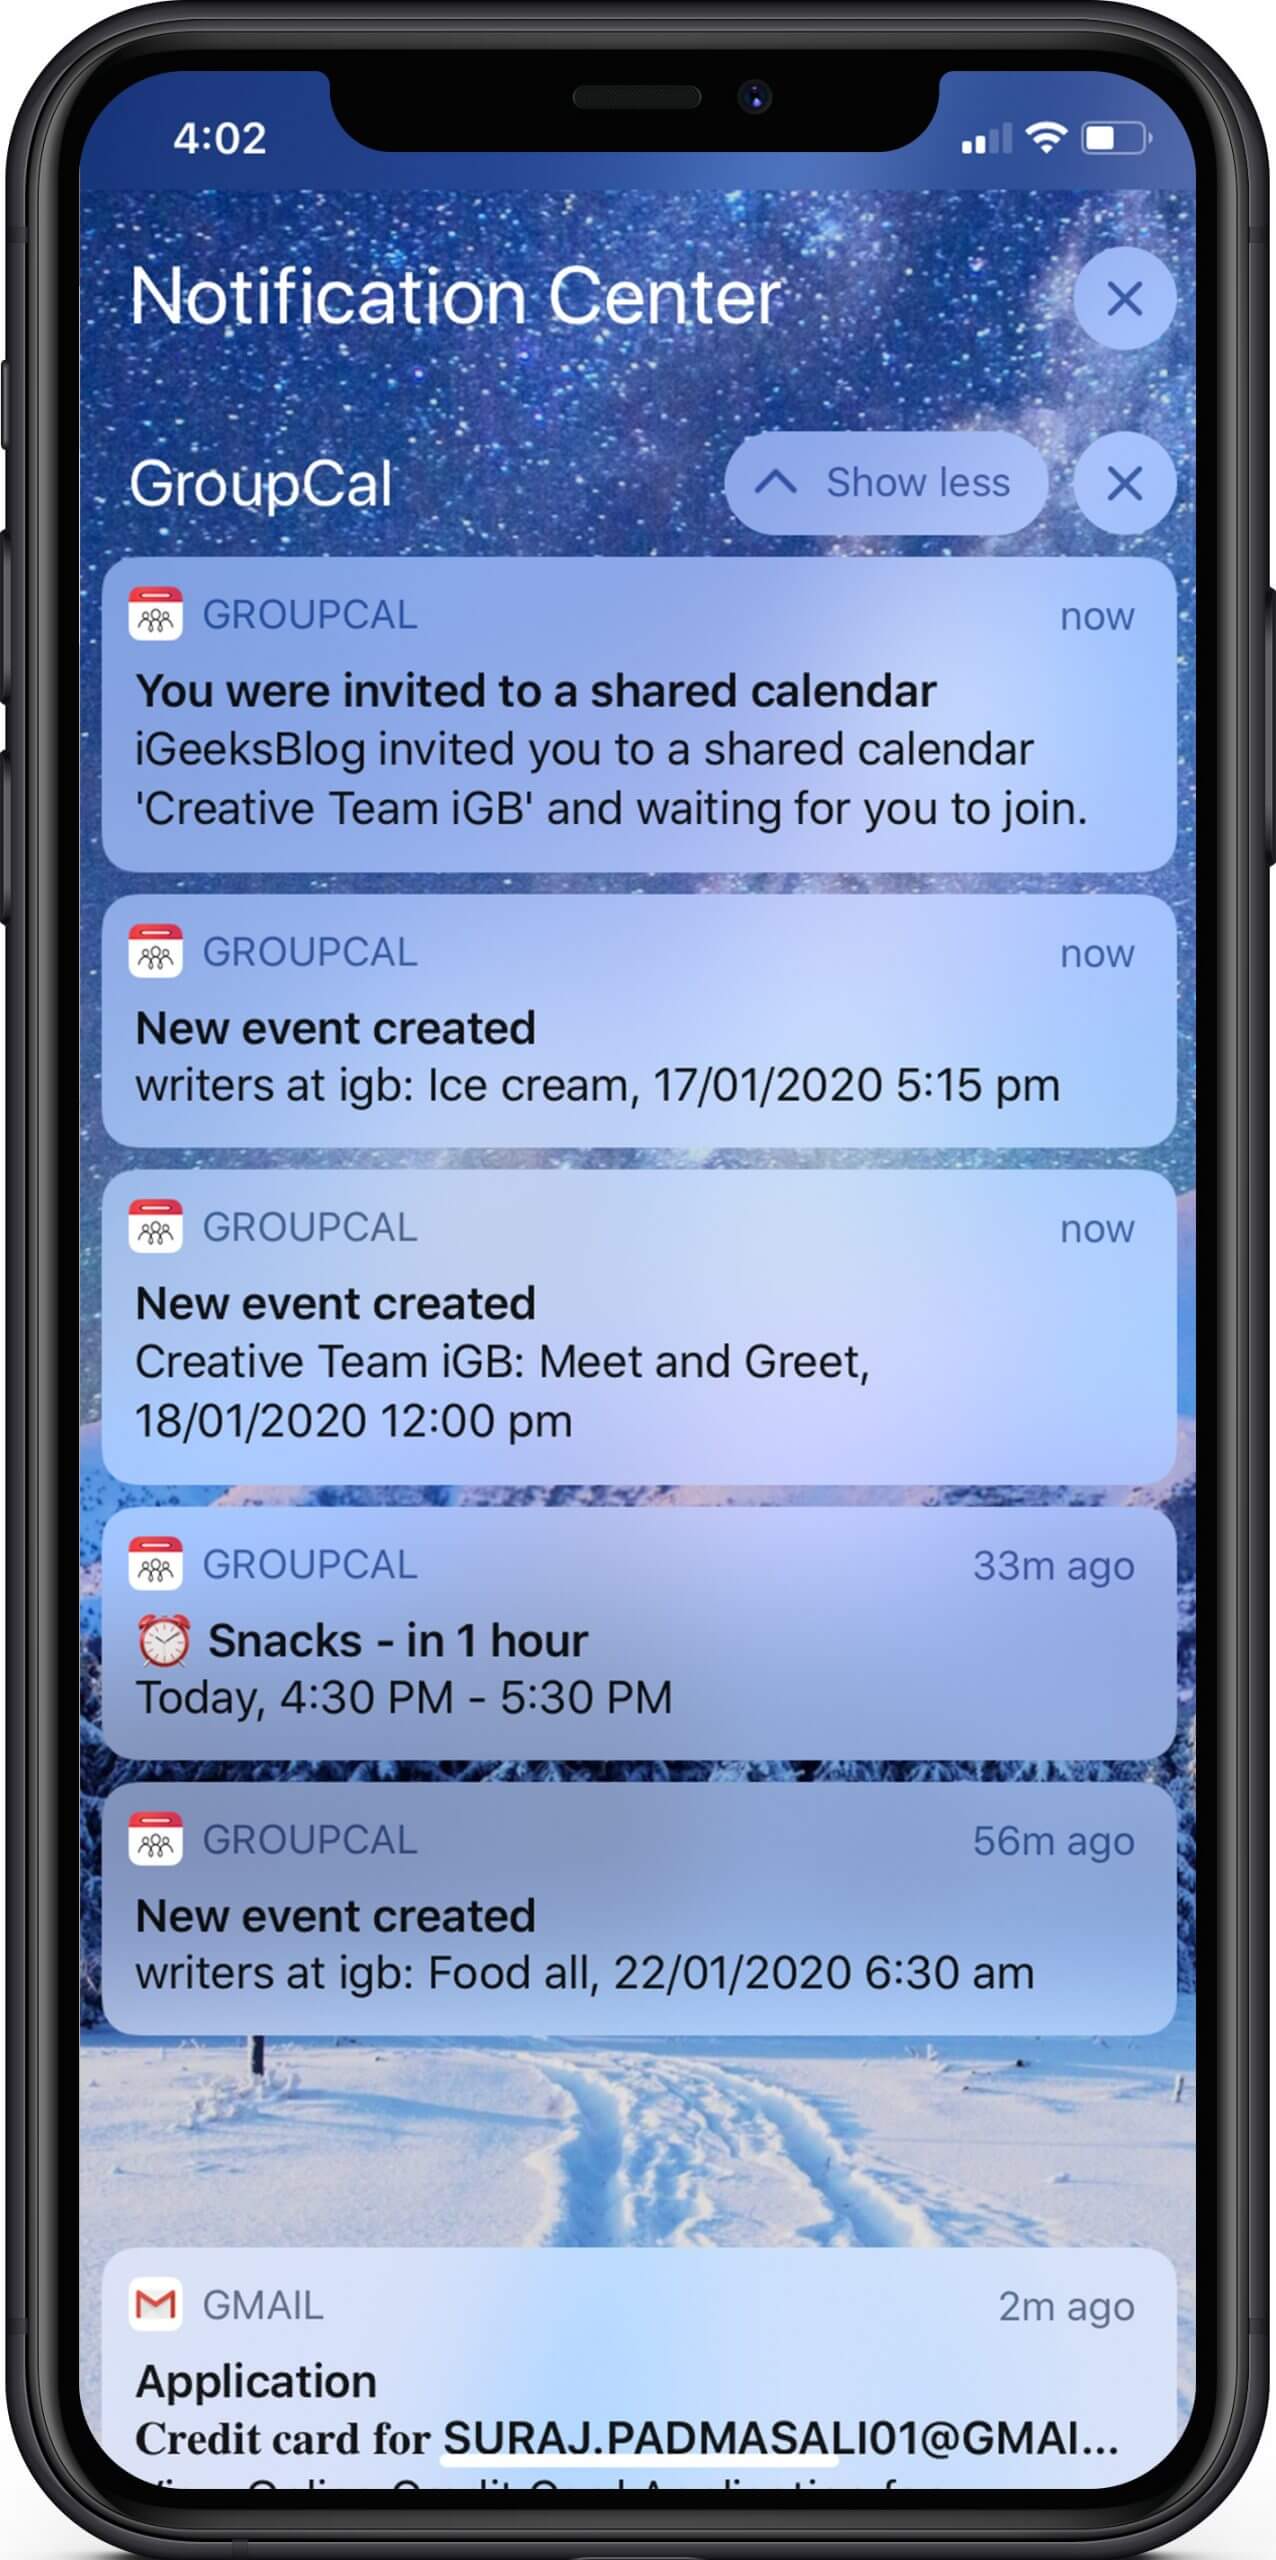 Get Notification of Event in Real Time in GroupCal App on iPhone